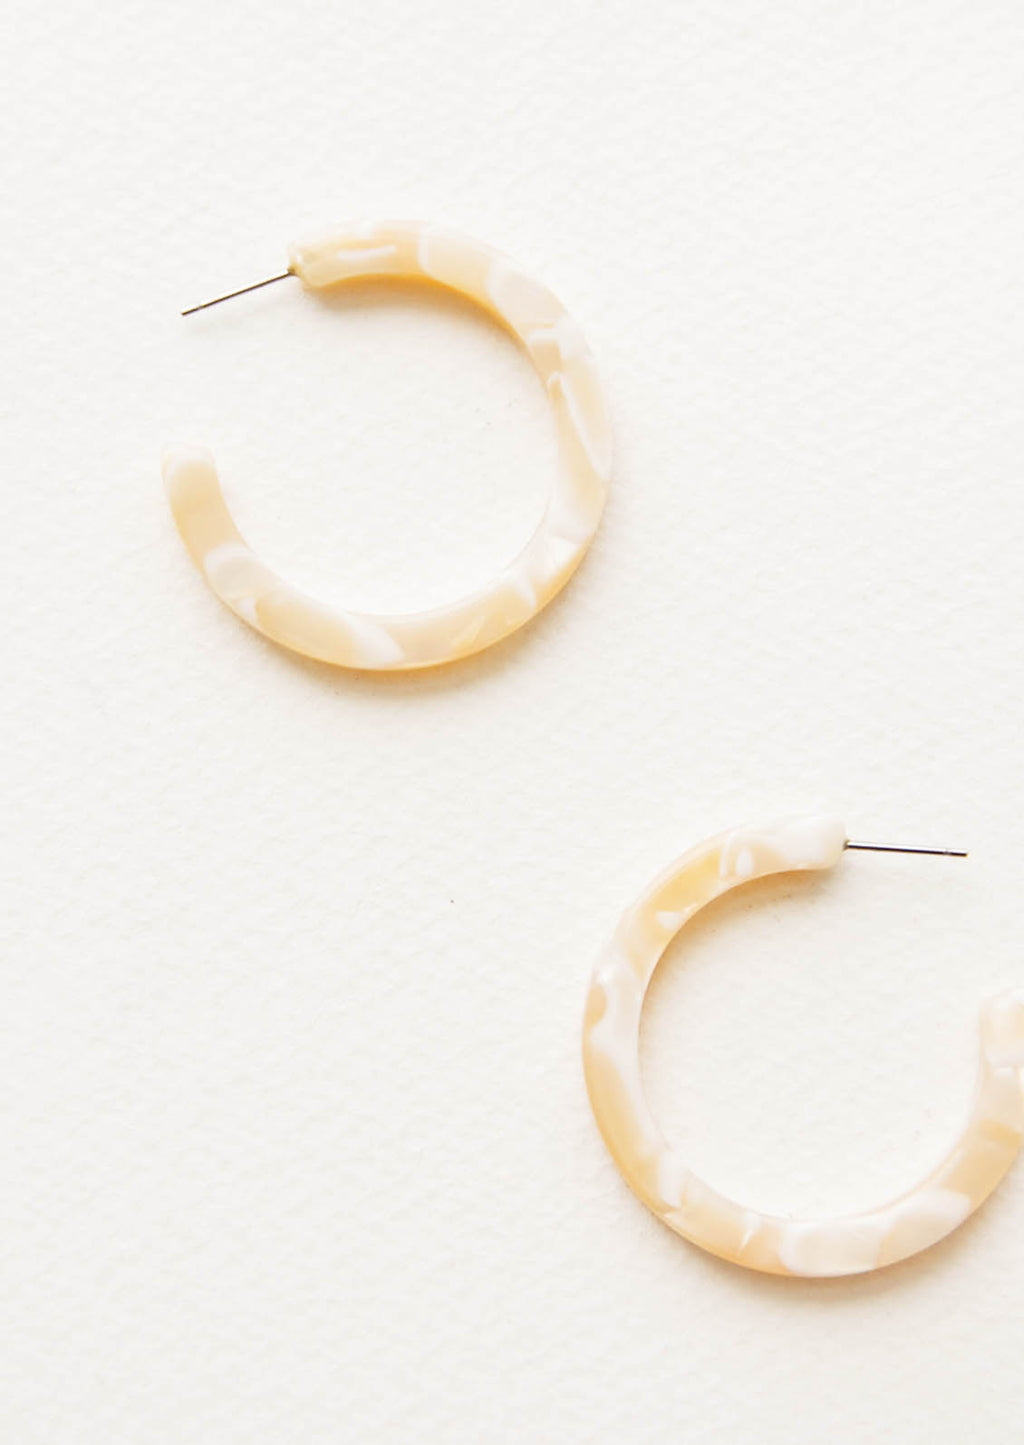 Ivory Shell: Three quarter hoop earrings in marbled ivory and beige acetate.